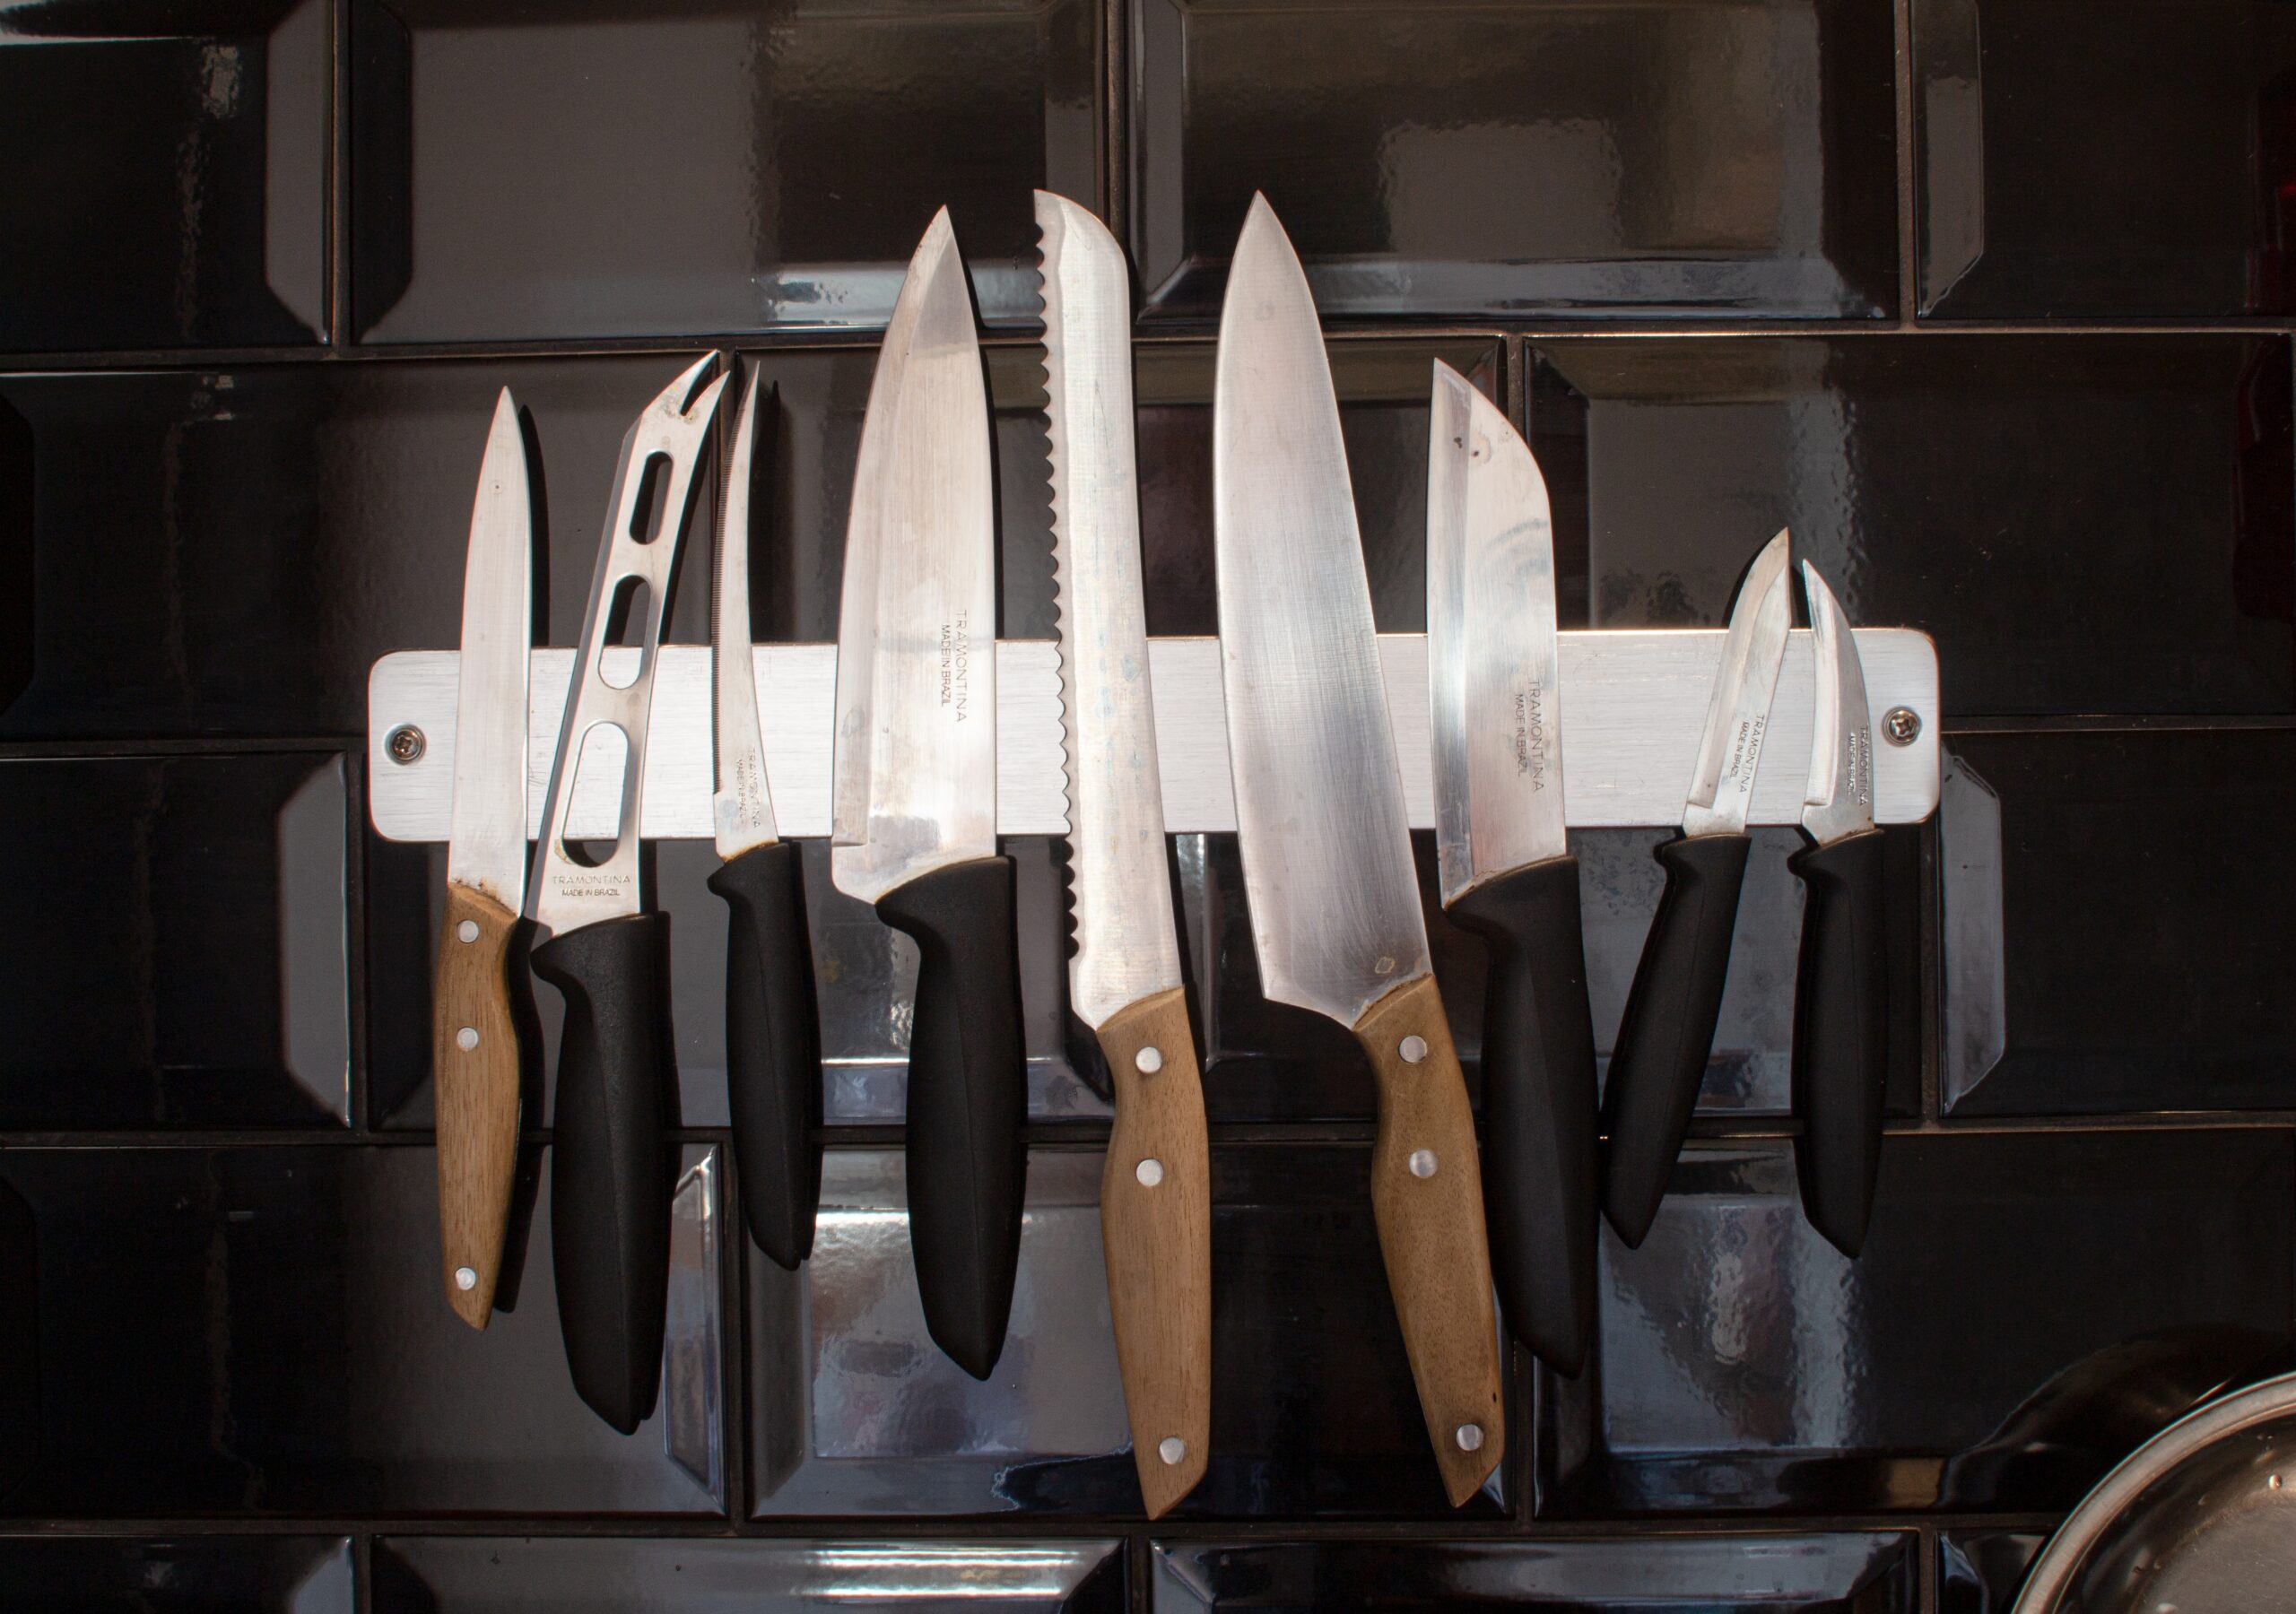 Essential Tools for Every Kitchen: Cutting Boards and Utility Knives at House of Knives”